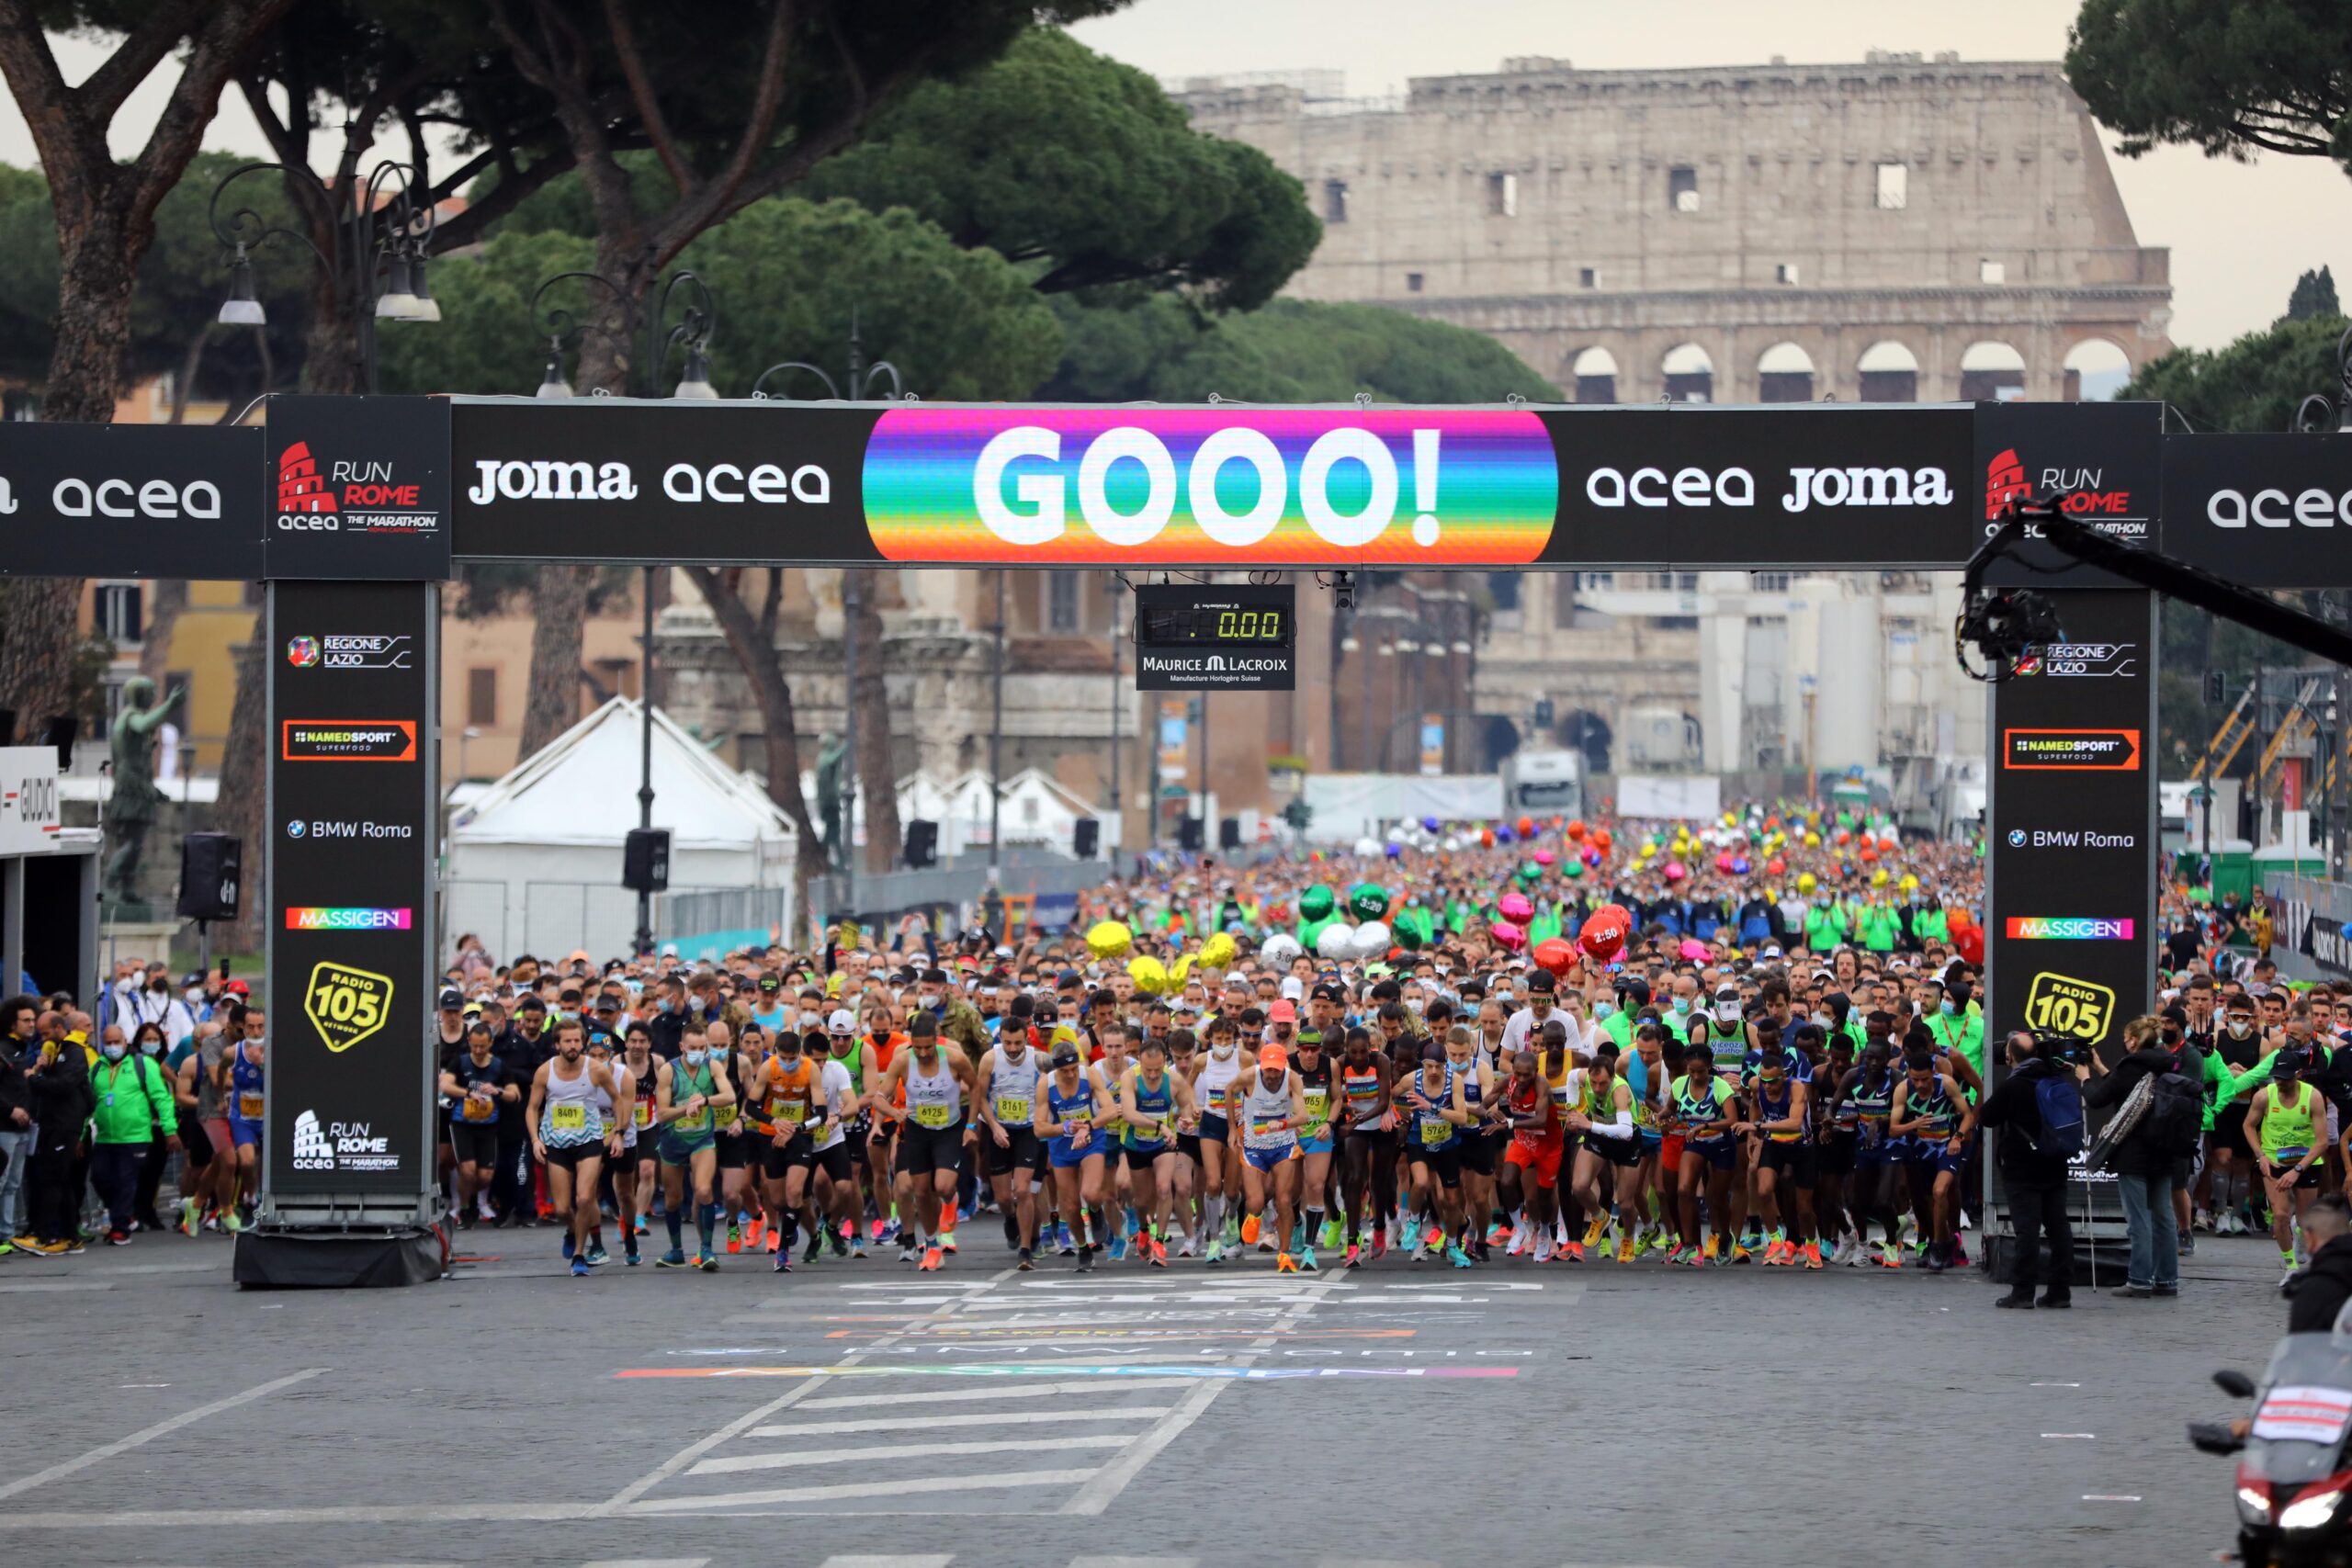 Acea Run Rome The Marathon, an increasingly sustainable sporting event